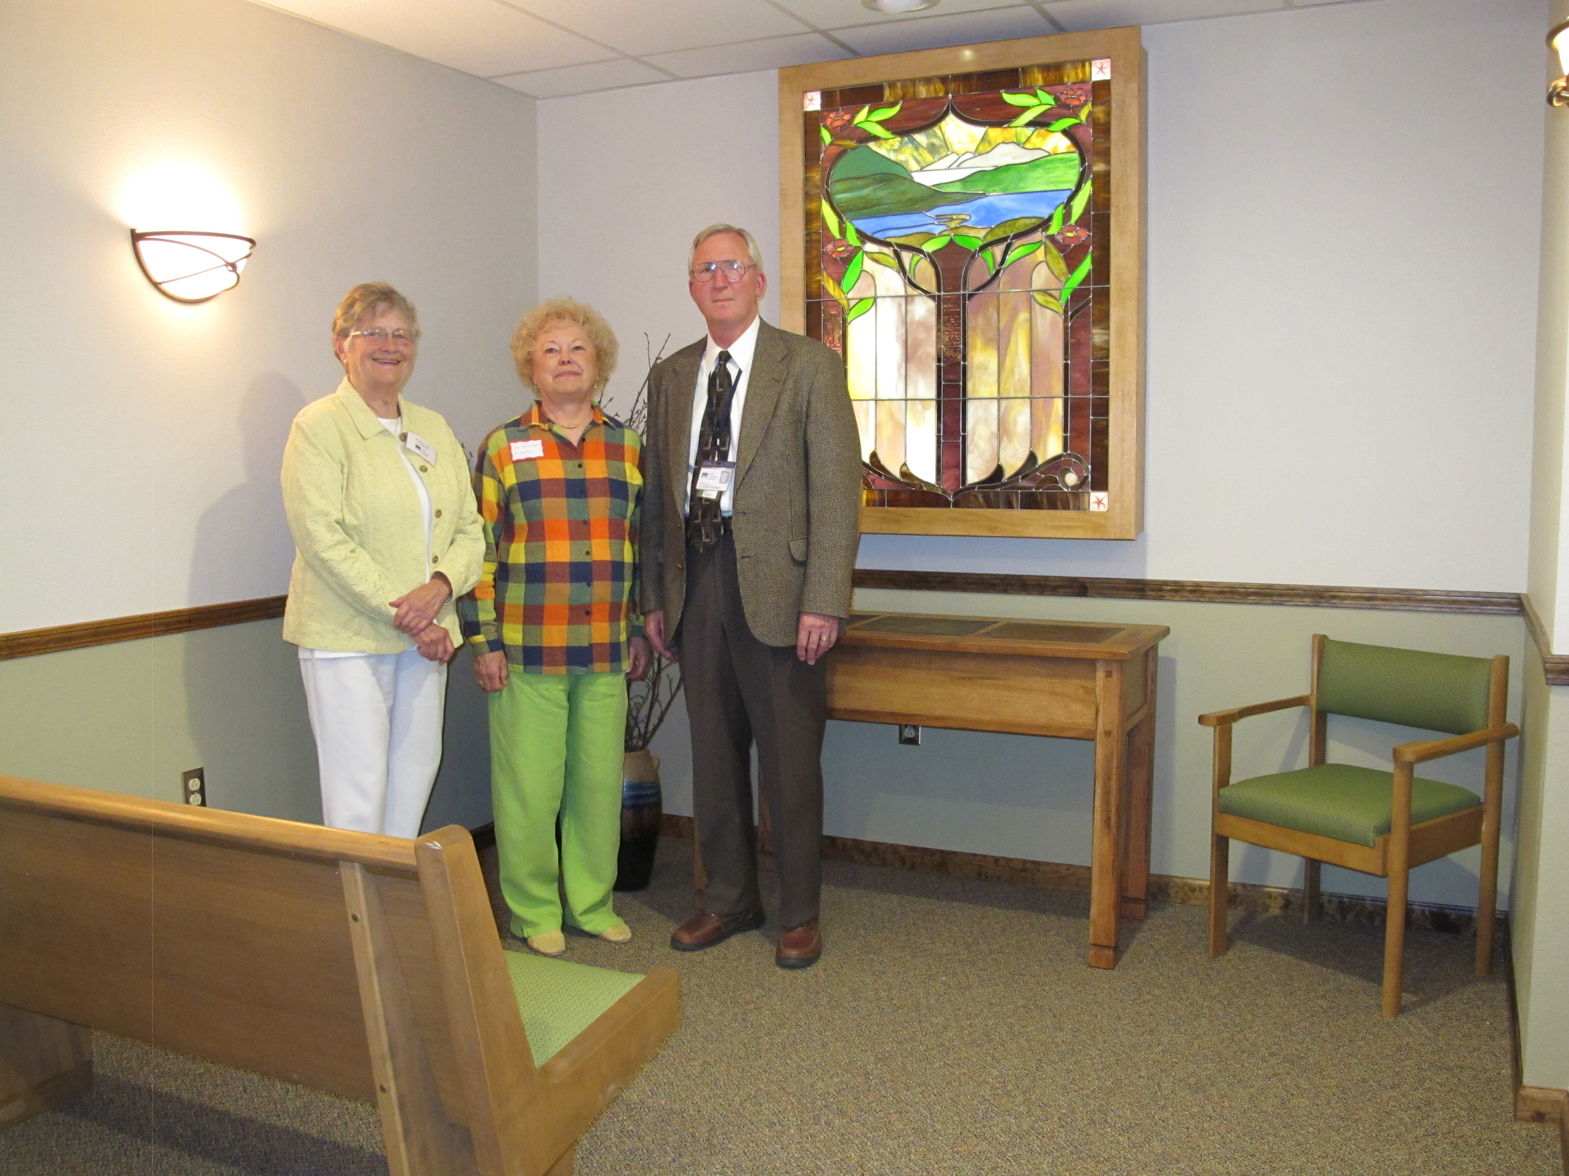 Phyllis Cooper, South Peninsula Hospital Foundation President; Jan Goehringer, SPH Auxiliary Secretary and room designer; and Bob Redmond, SPH chaplain, pose in the hospital’s new Reflection Room. There will be an open house for the public to view the Reflection Room from noon-2 p.m. Sept. 8.                       -Photo provided